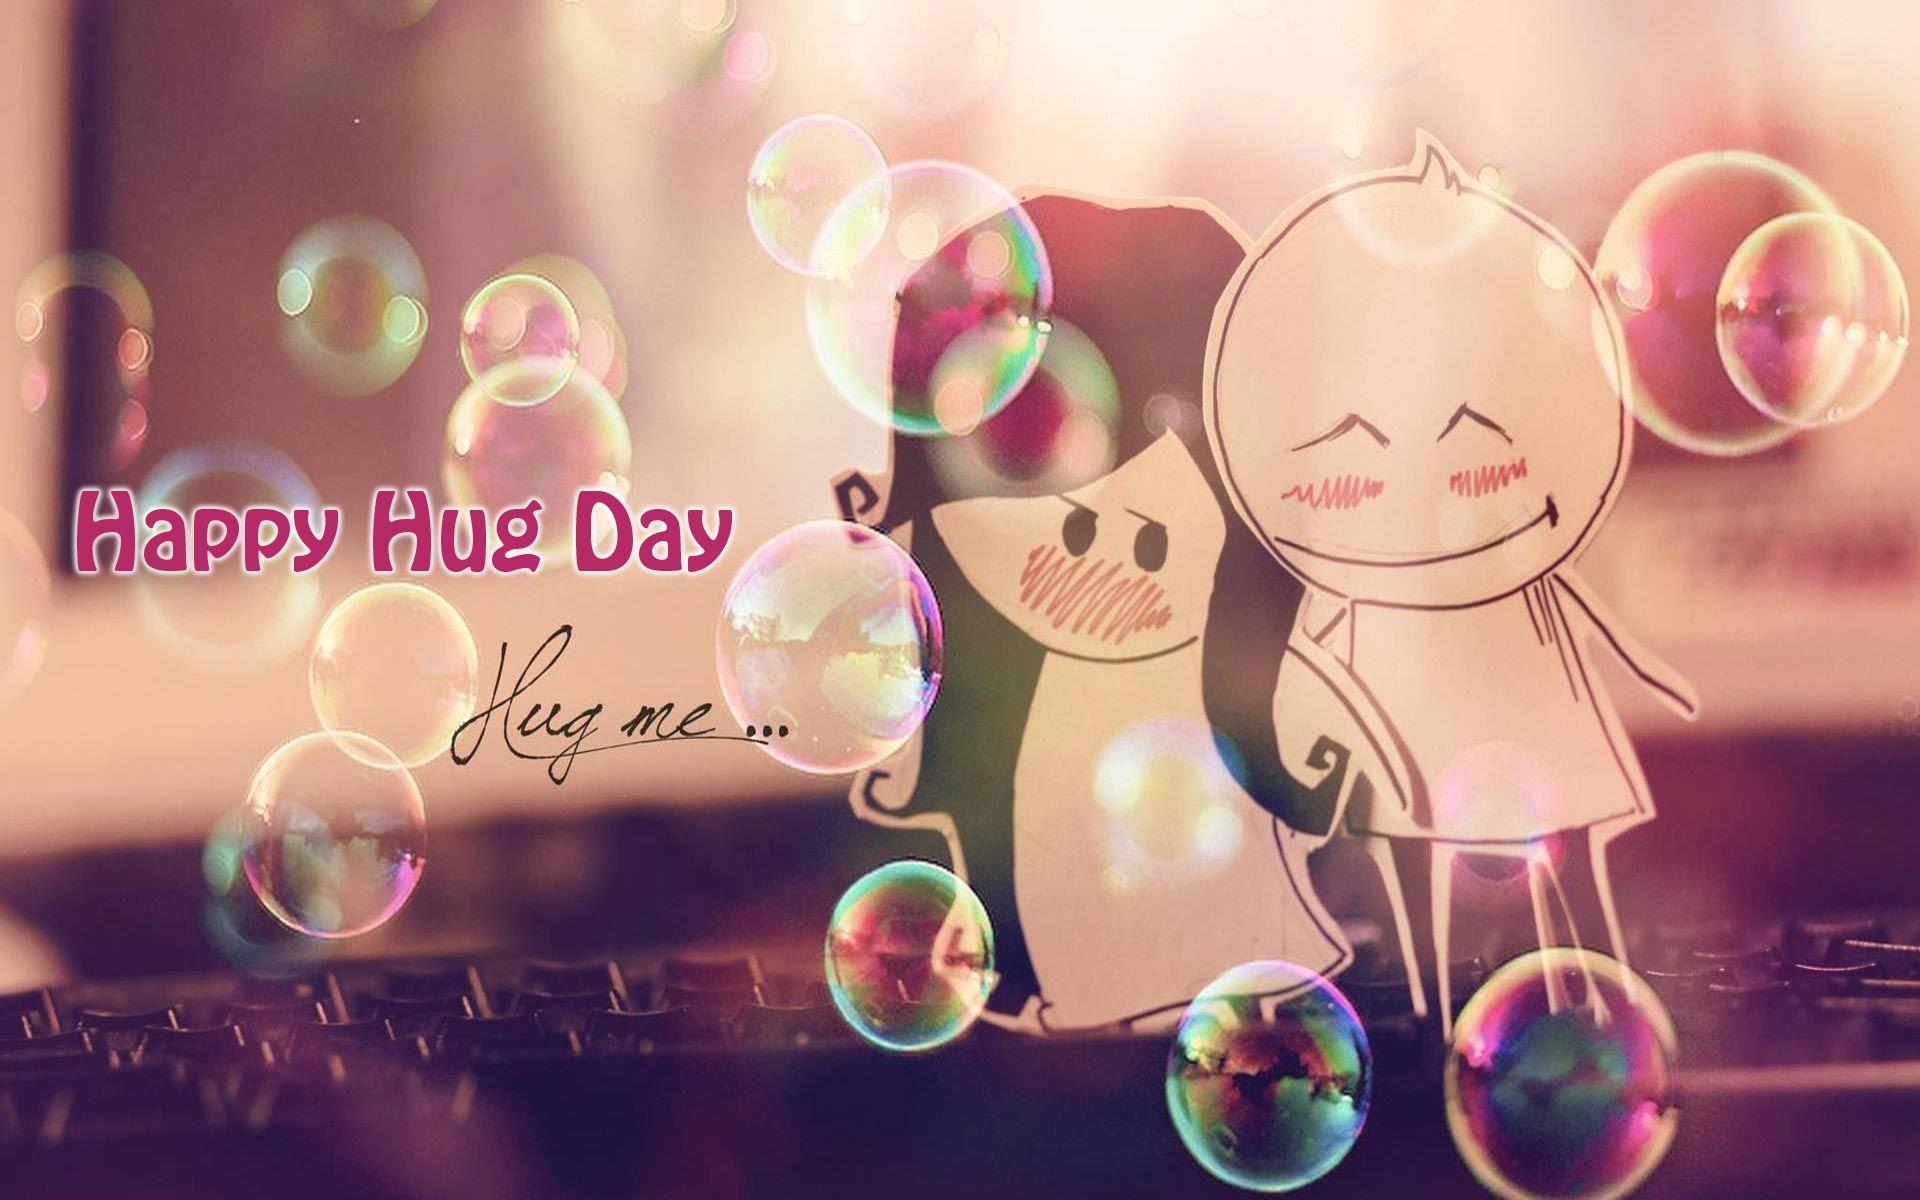 12th Feb*} Happy Hug day HD image 2018 quotes wishes messages